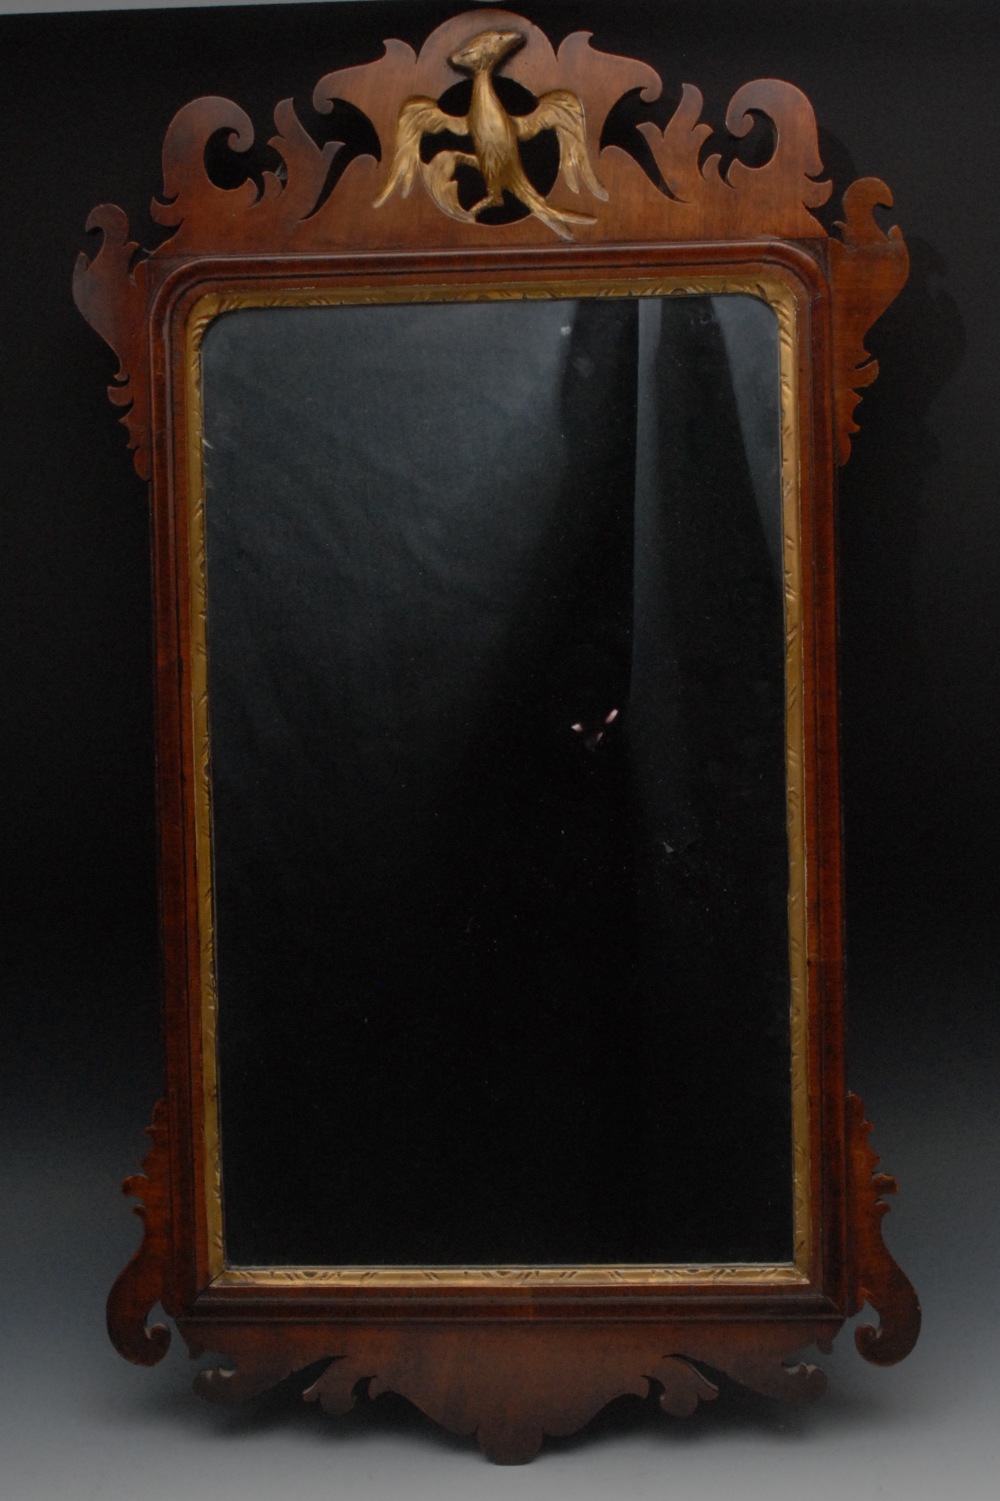 A George II style Vauxhall type looking glass, pierced with parcel gilt ho-ho bird cresting, 73cm